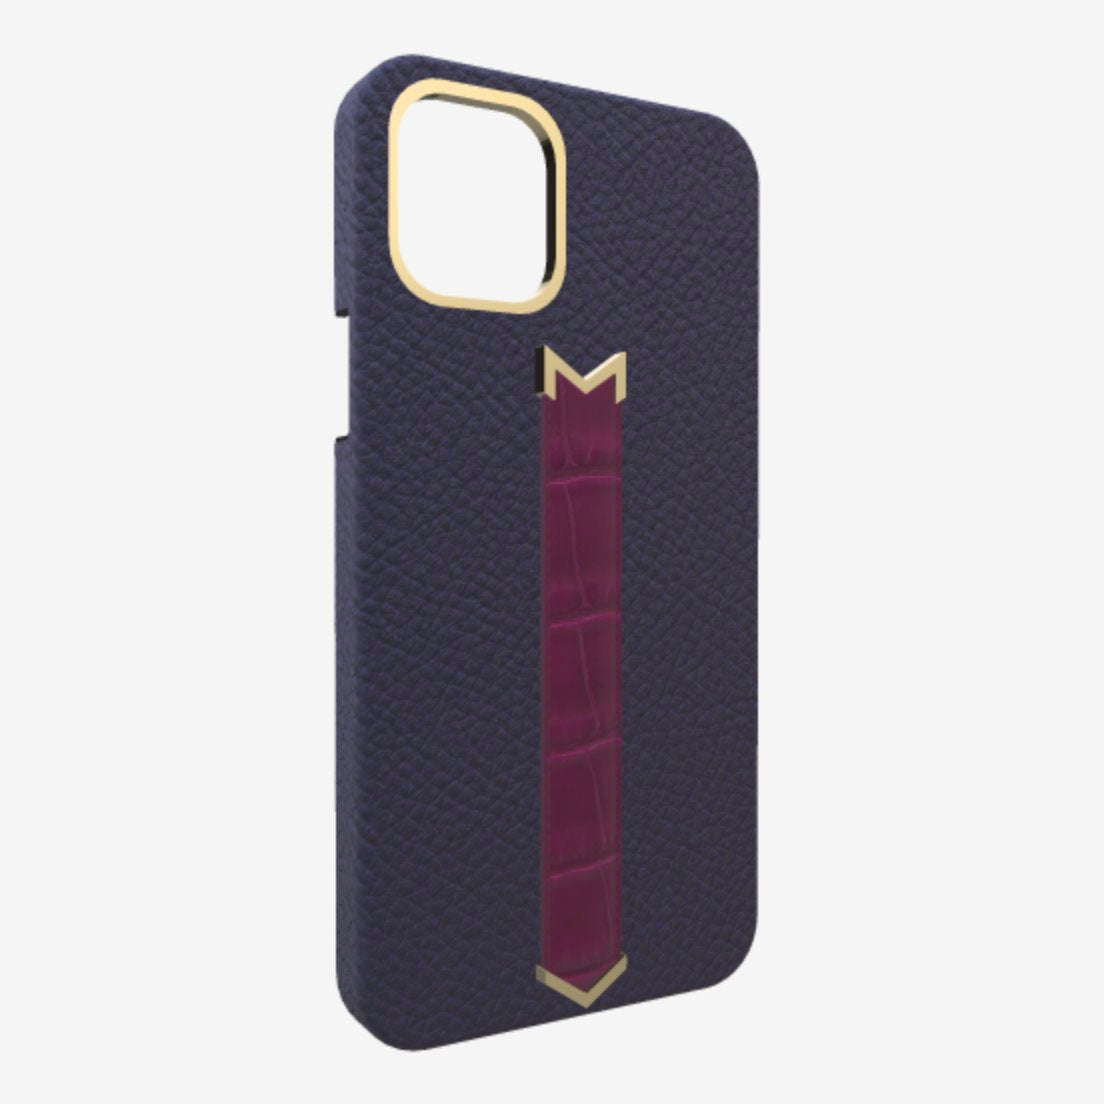 Gold Finger Strap Case for iPhone 13 Pro Max in Genuine Calfskin and Alligator Navy Blue Boysenberry Island 